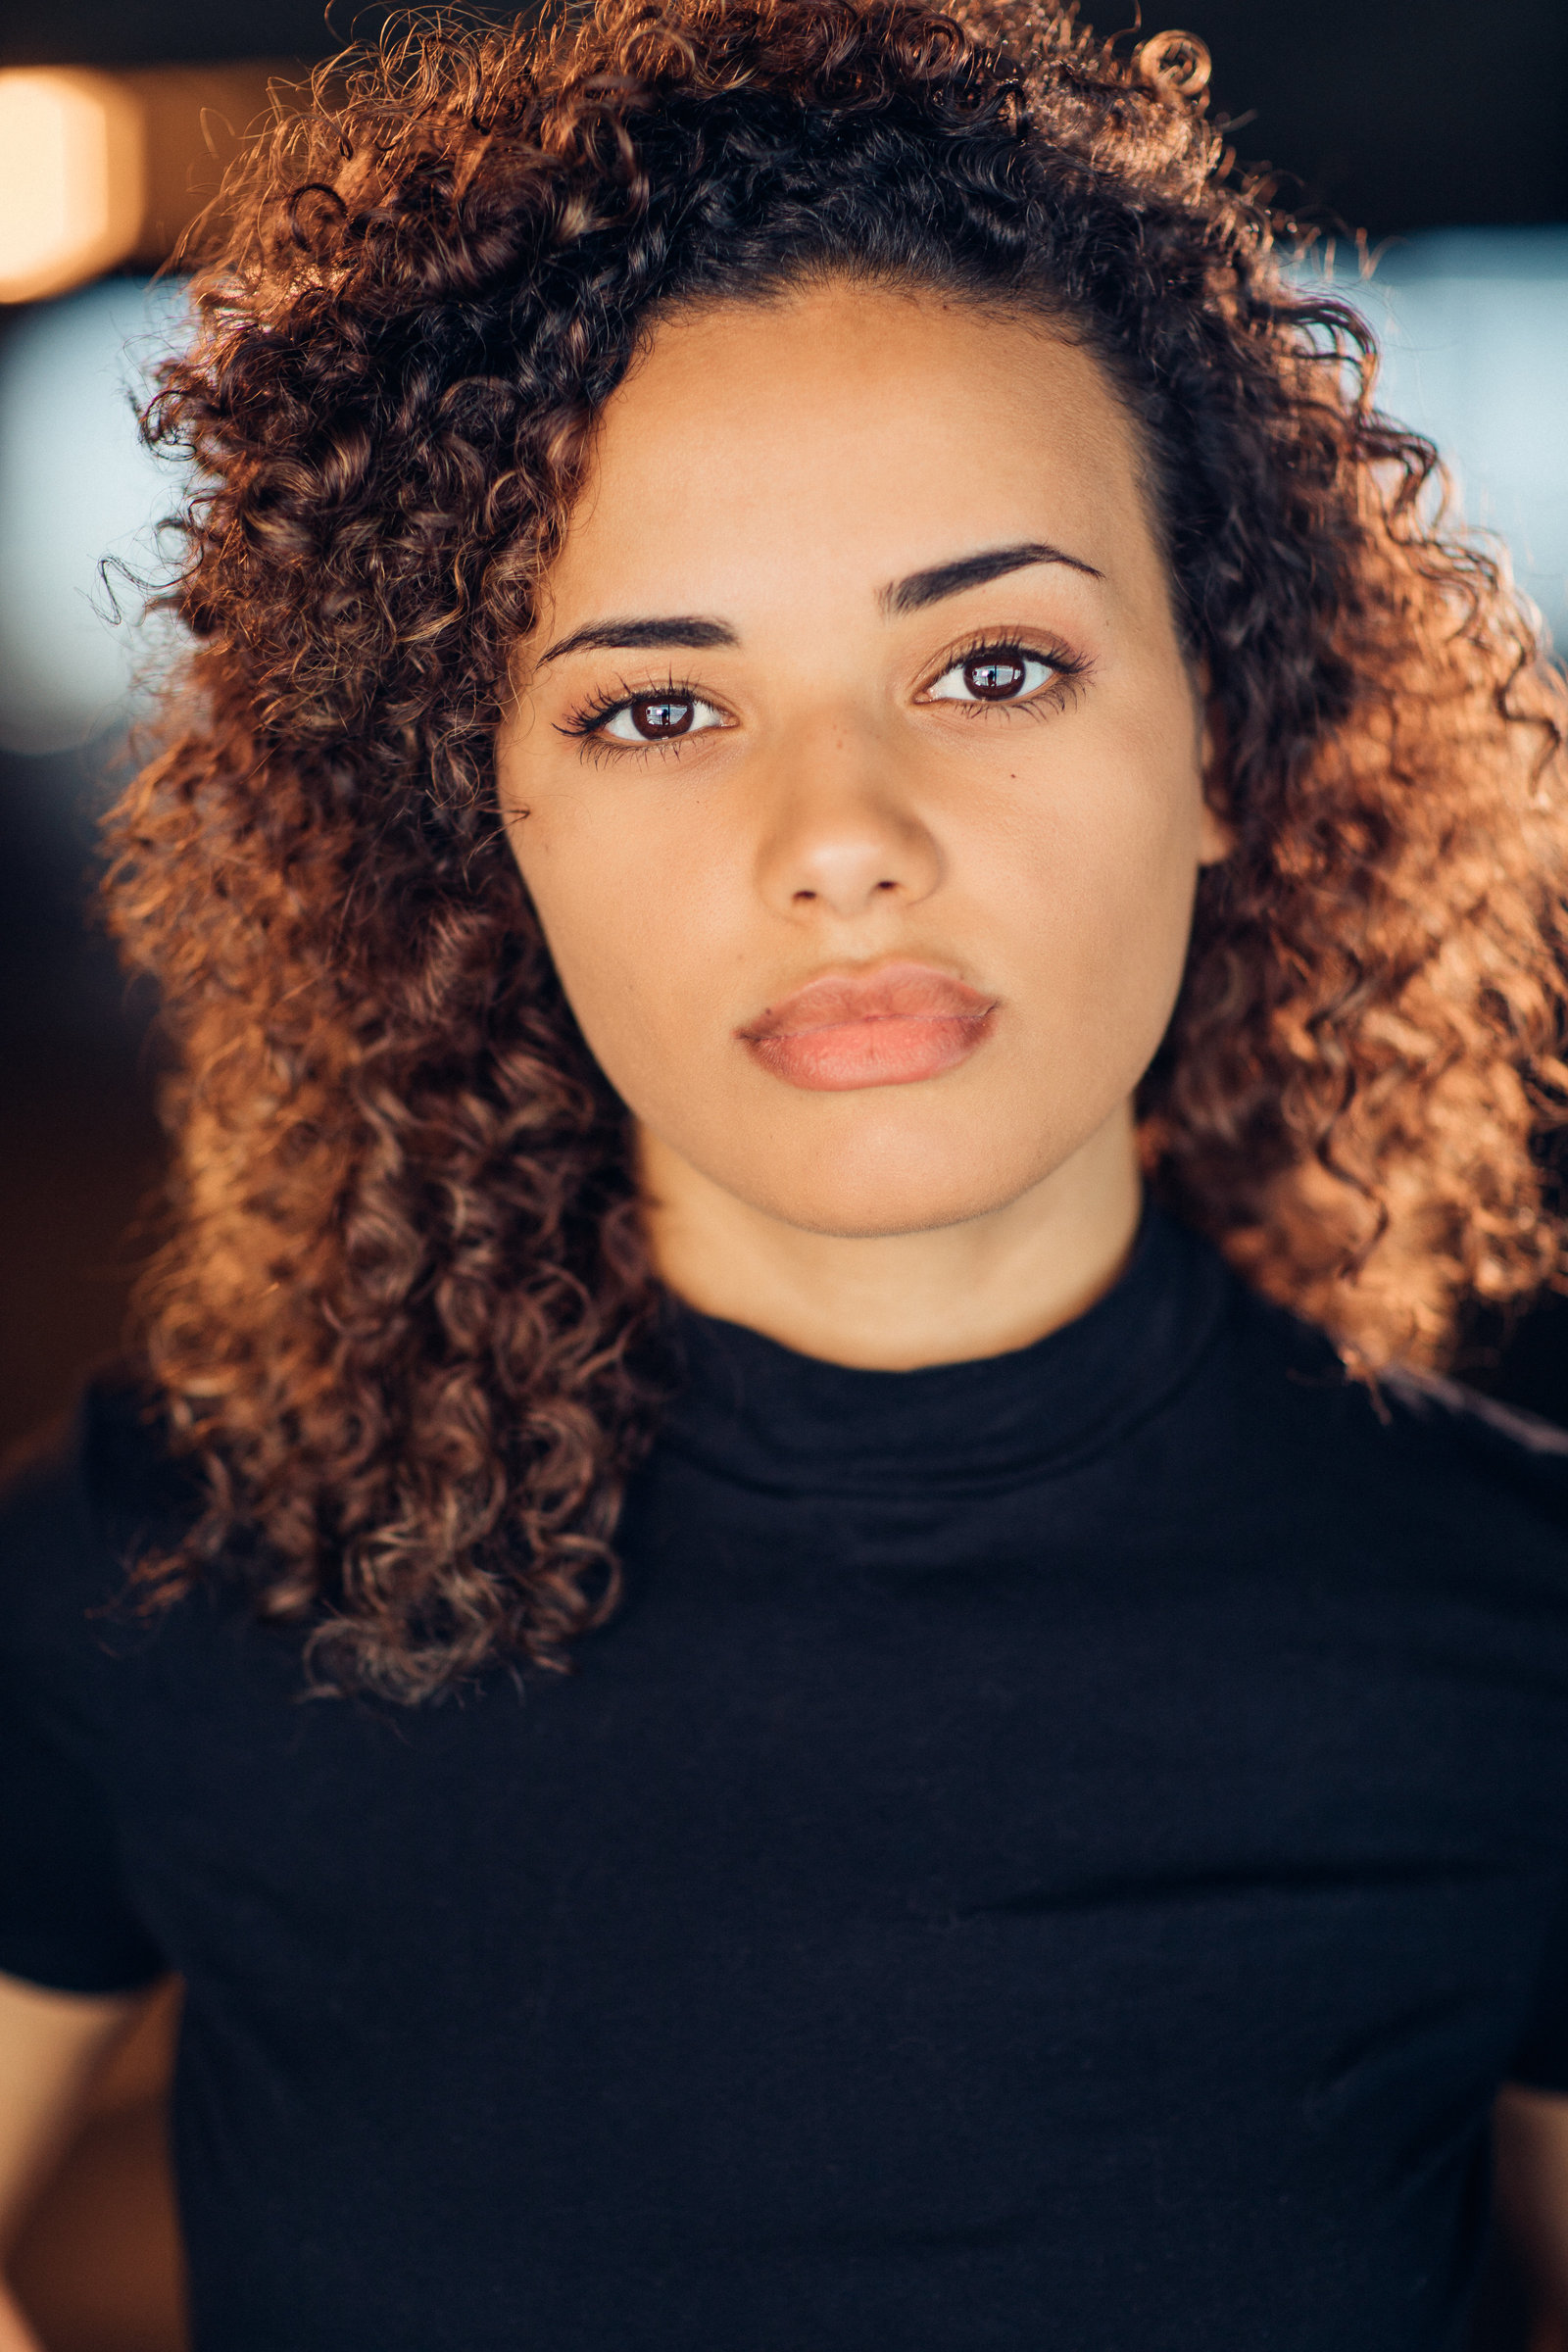 Headshot Photo Of Young Woman In Black Turtle Neck Shirt